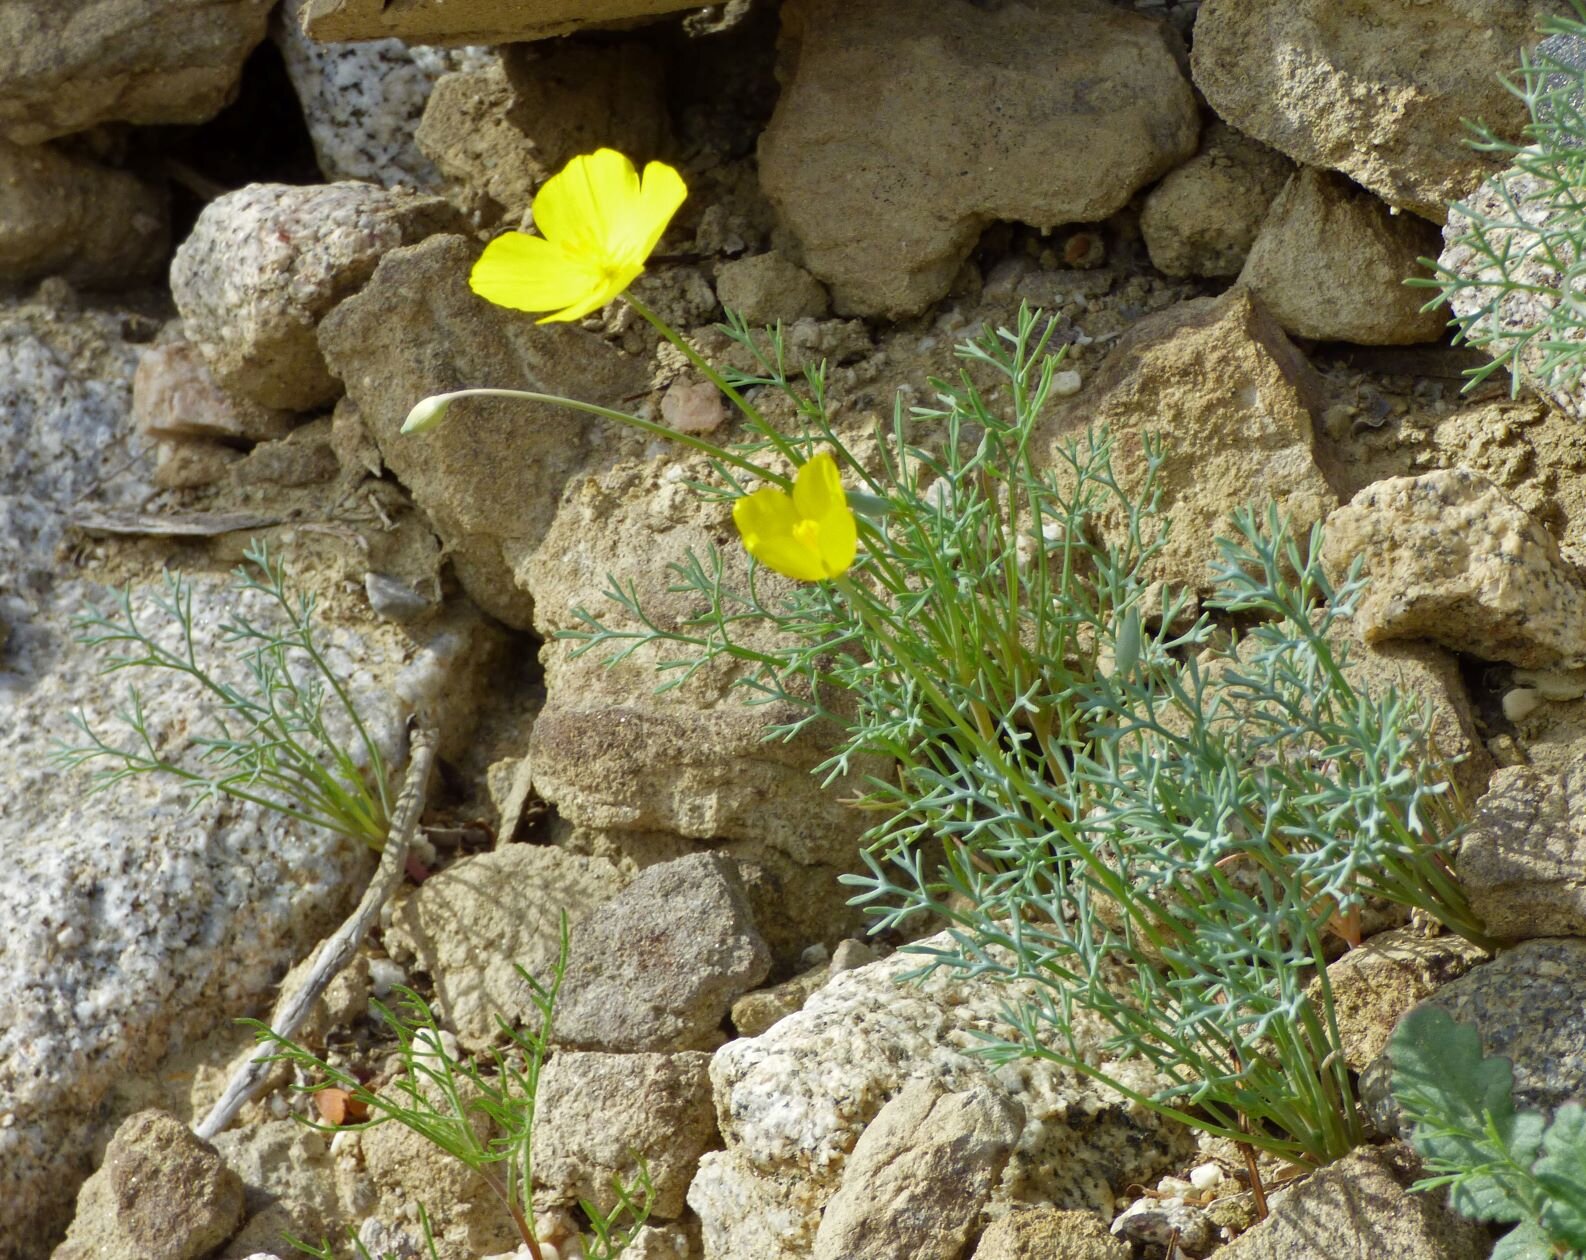 Here is an arbitrary selection: Eschscholzia parishii,